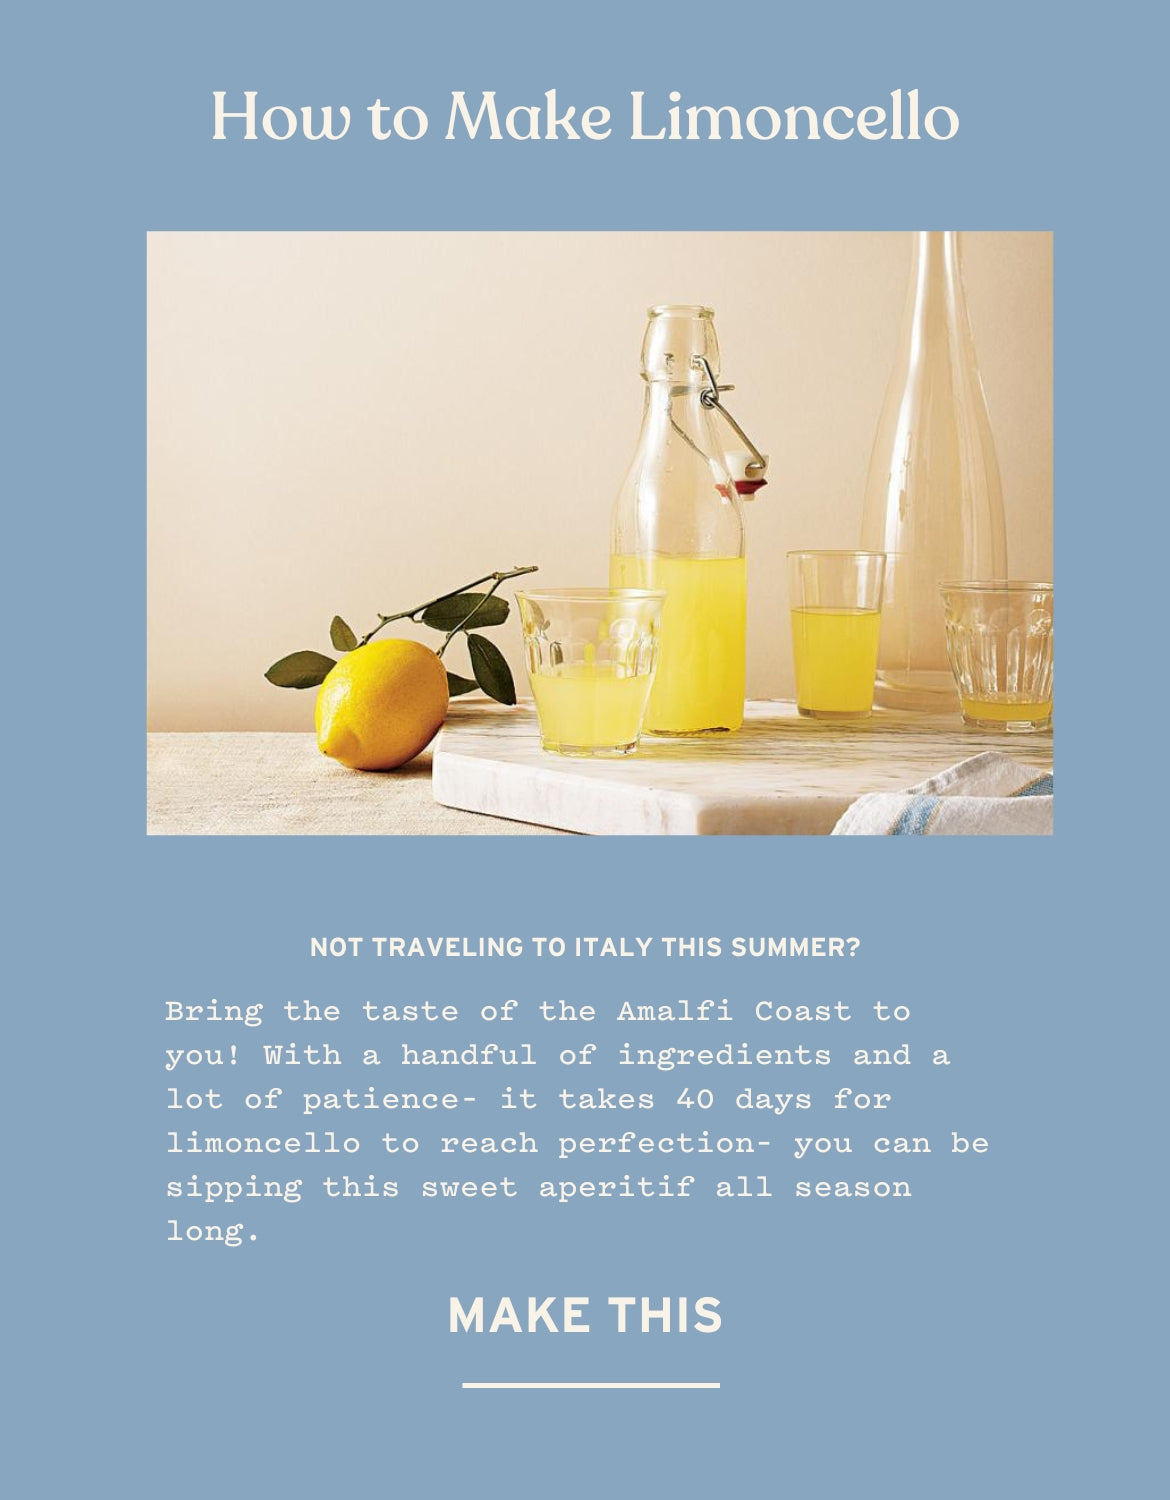 how to make limoncello for the summer, a recipe